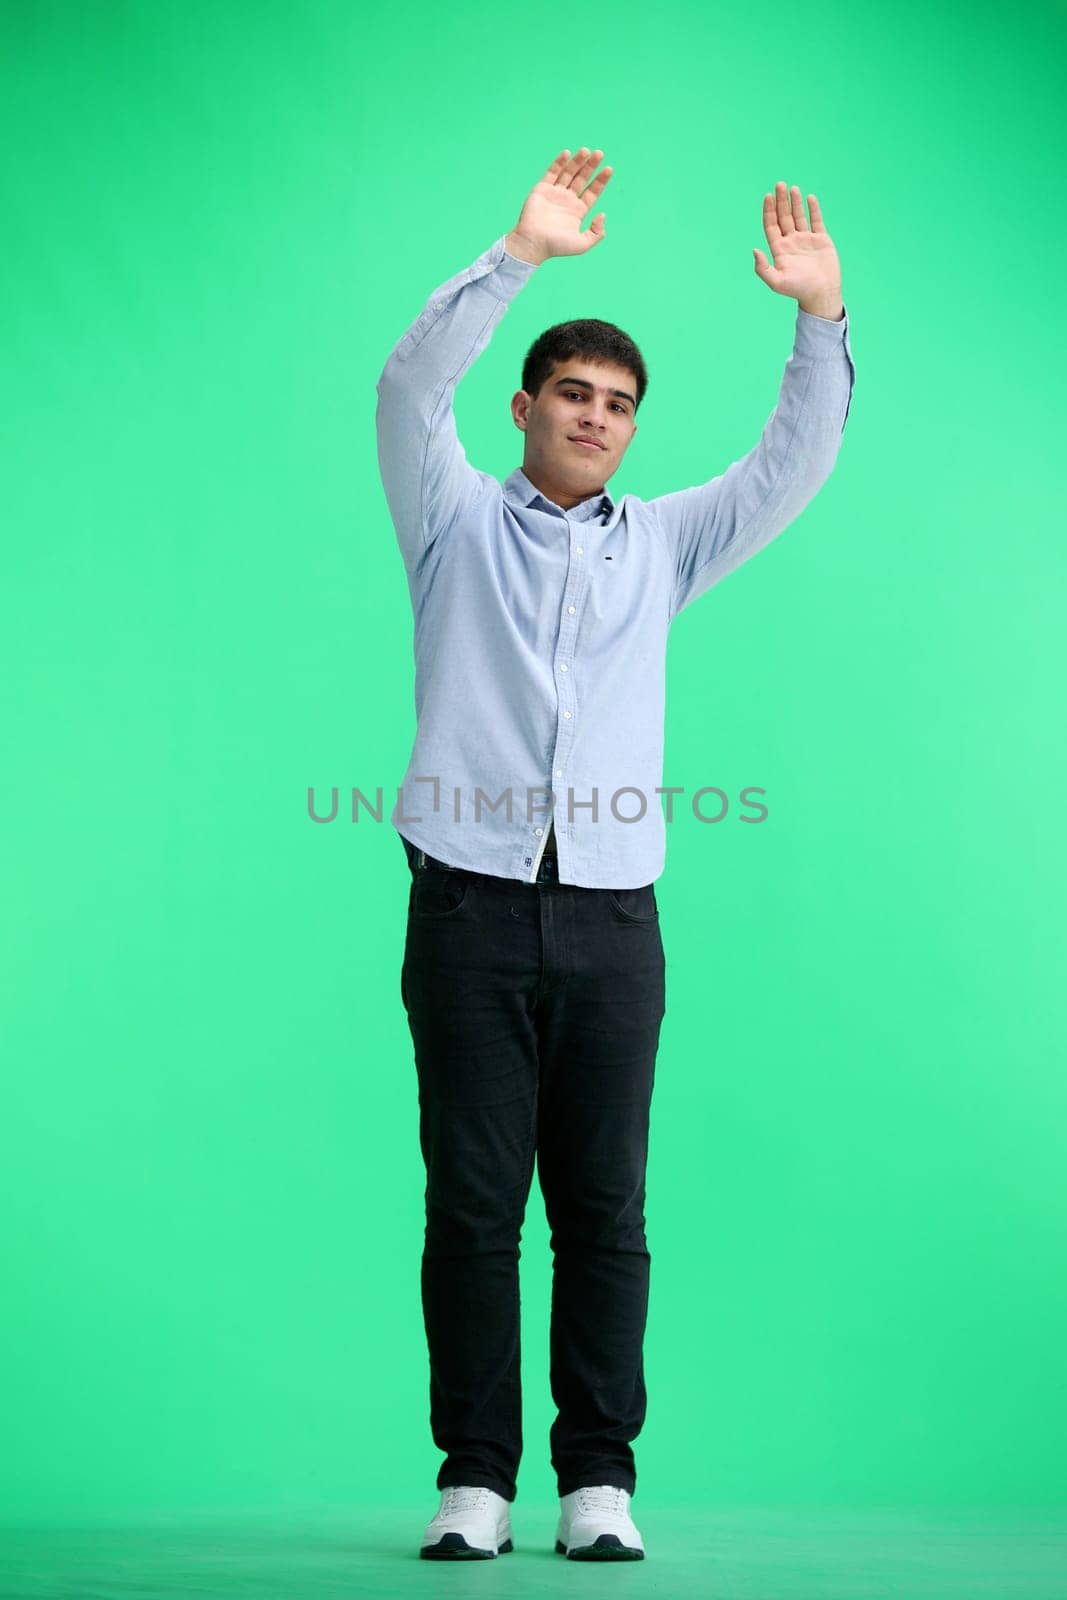 A man, full-length, on a green background, waving his arms.